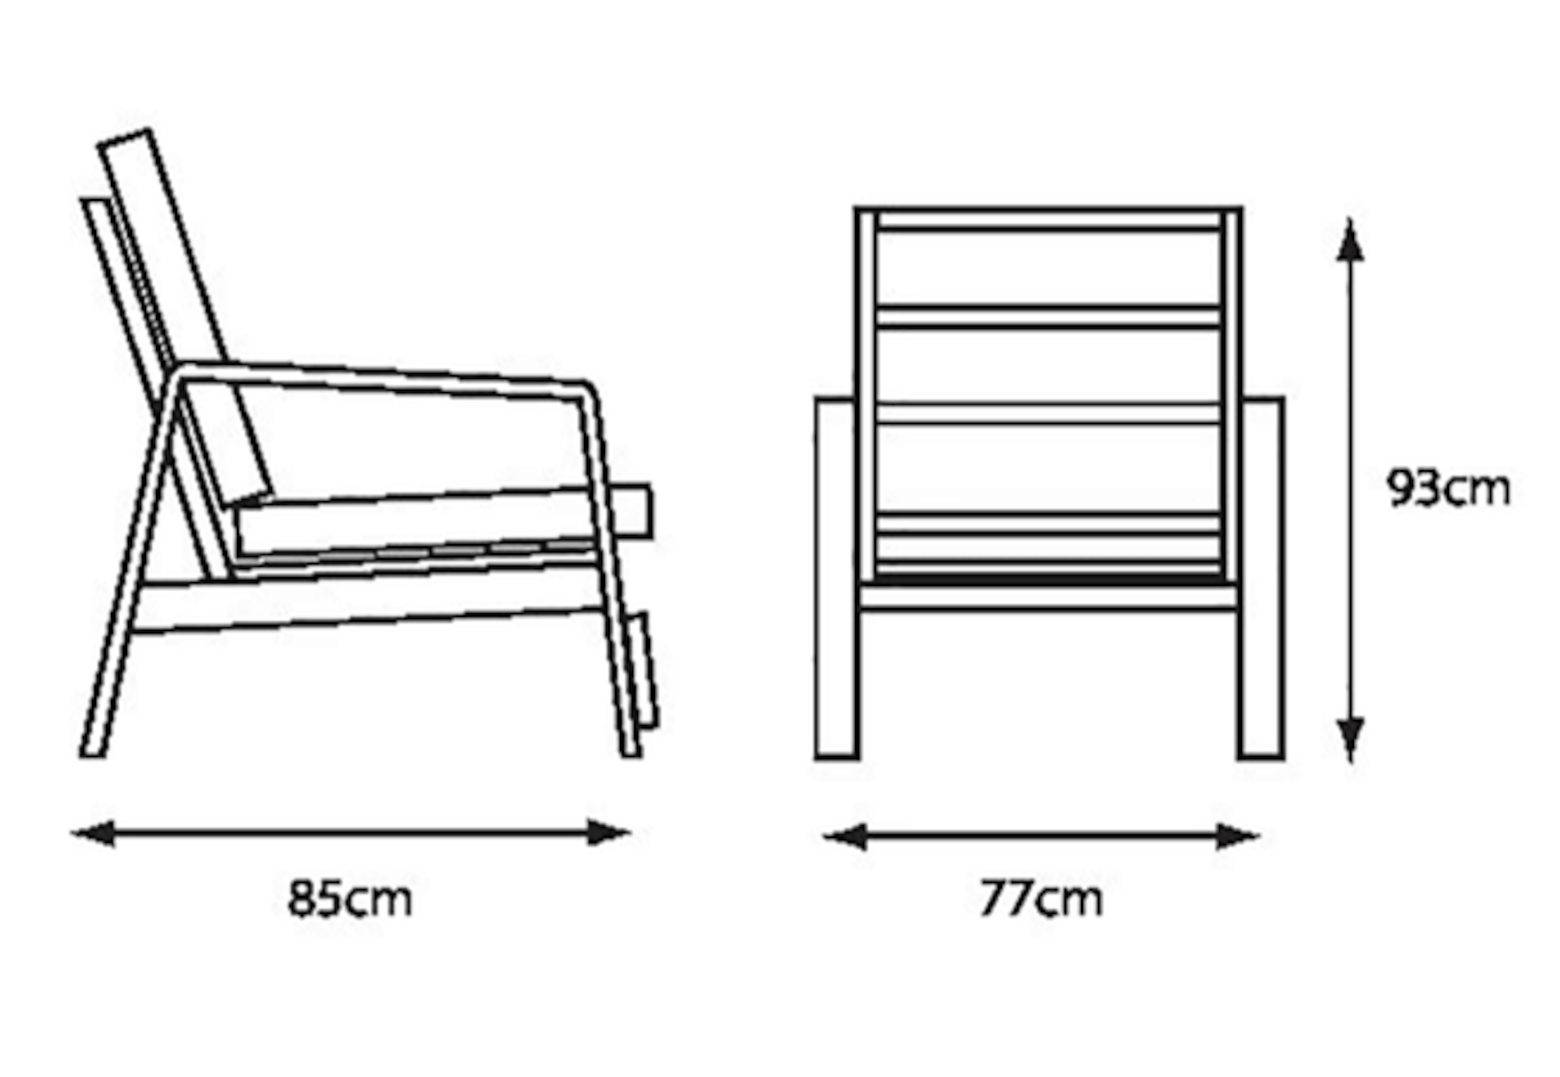 Lounge Chair - dimensions image